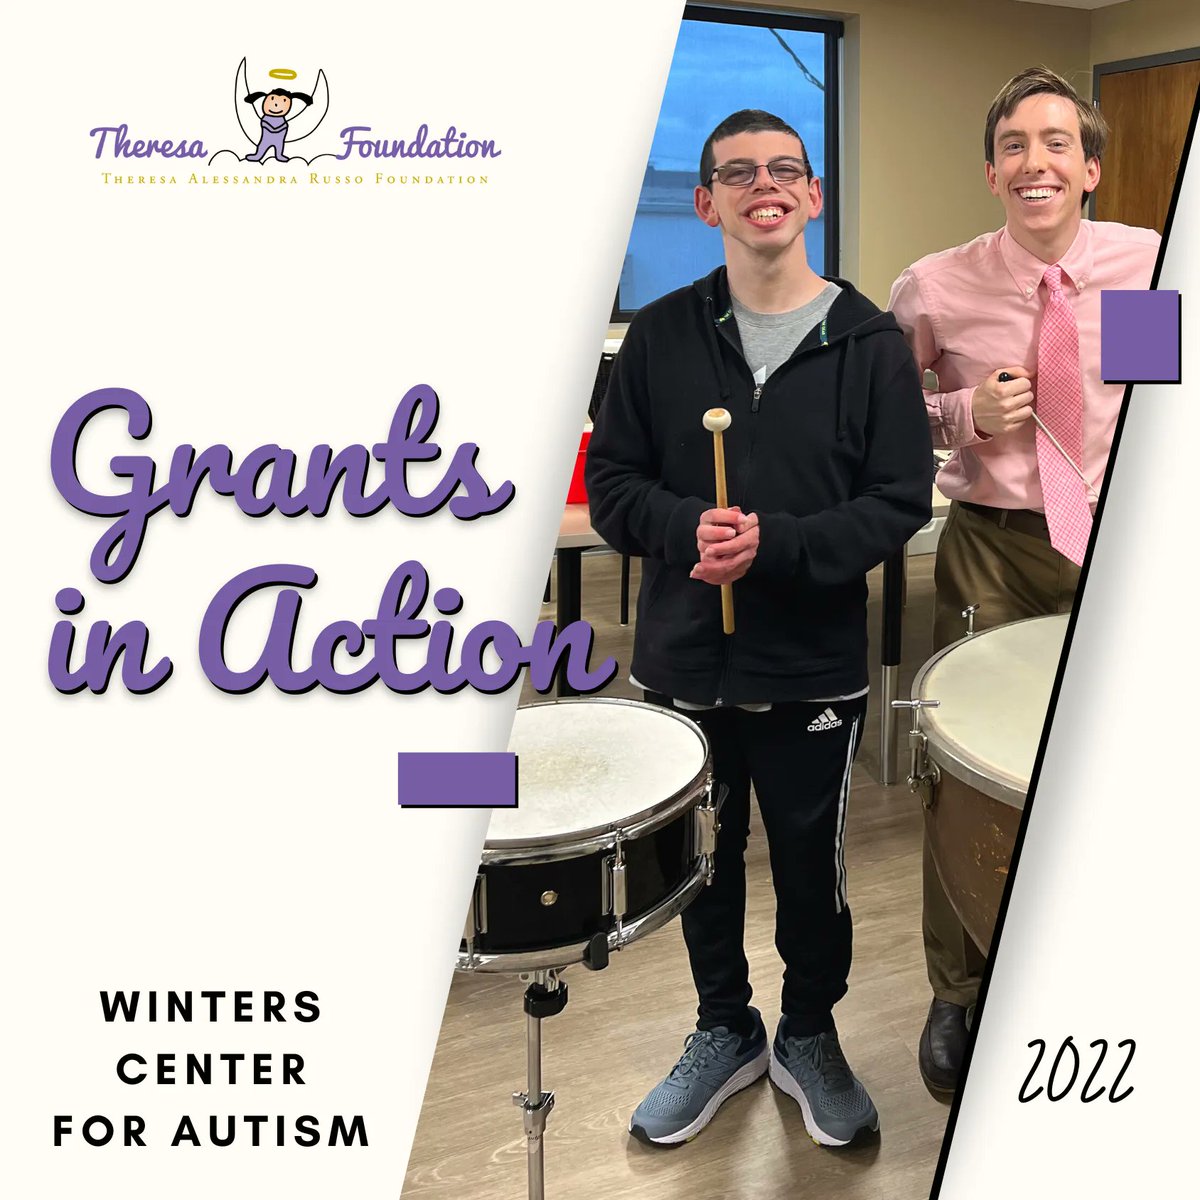 In July 2022, we funded a music grant toward the creation of a Percussion Ensemble and lessons at @Winters4Autism. Led by the incomparable Jeffrey Kautz, the ensemble  holds rehearsals once a week for its upcoming concerts! #theresafoundation #WintersCenterforAutism #musicgrant